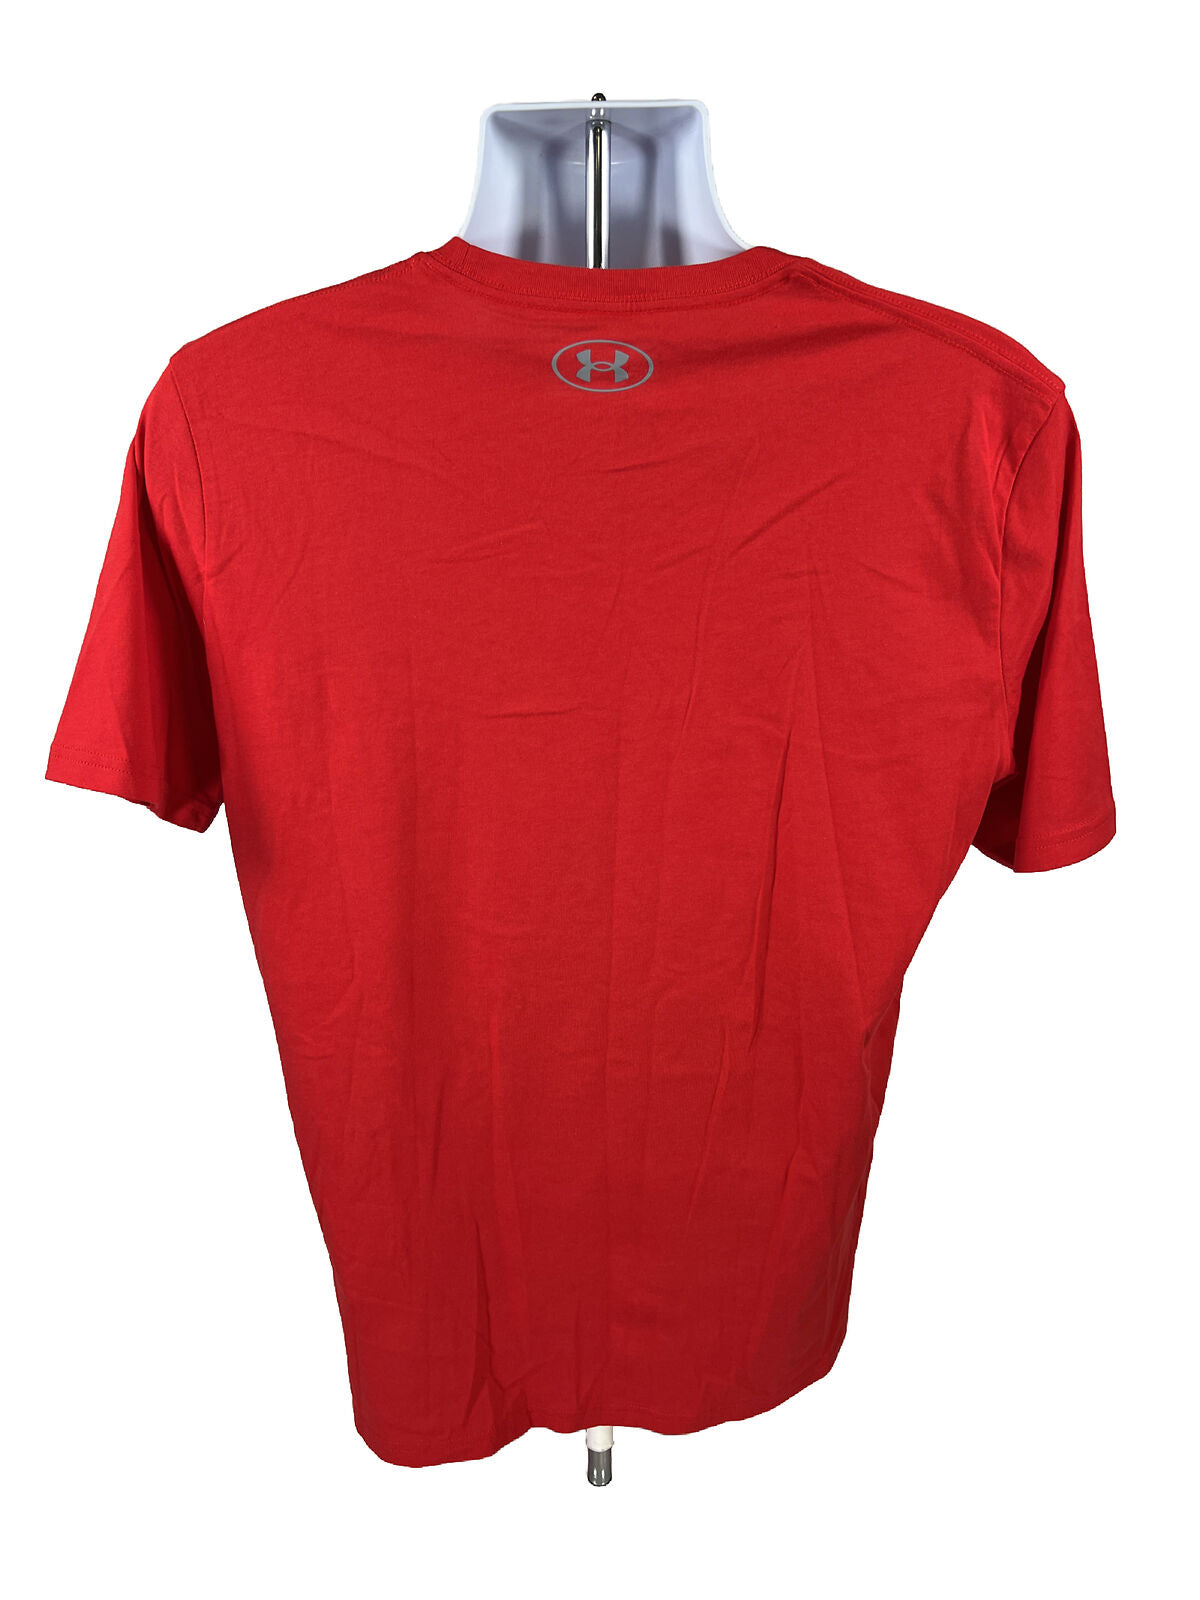 NEW Under Armour Men's Red Boxed Sportstyle Short Sleeve T-Shirt - L